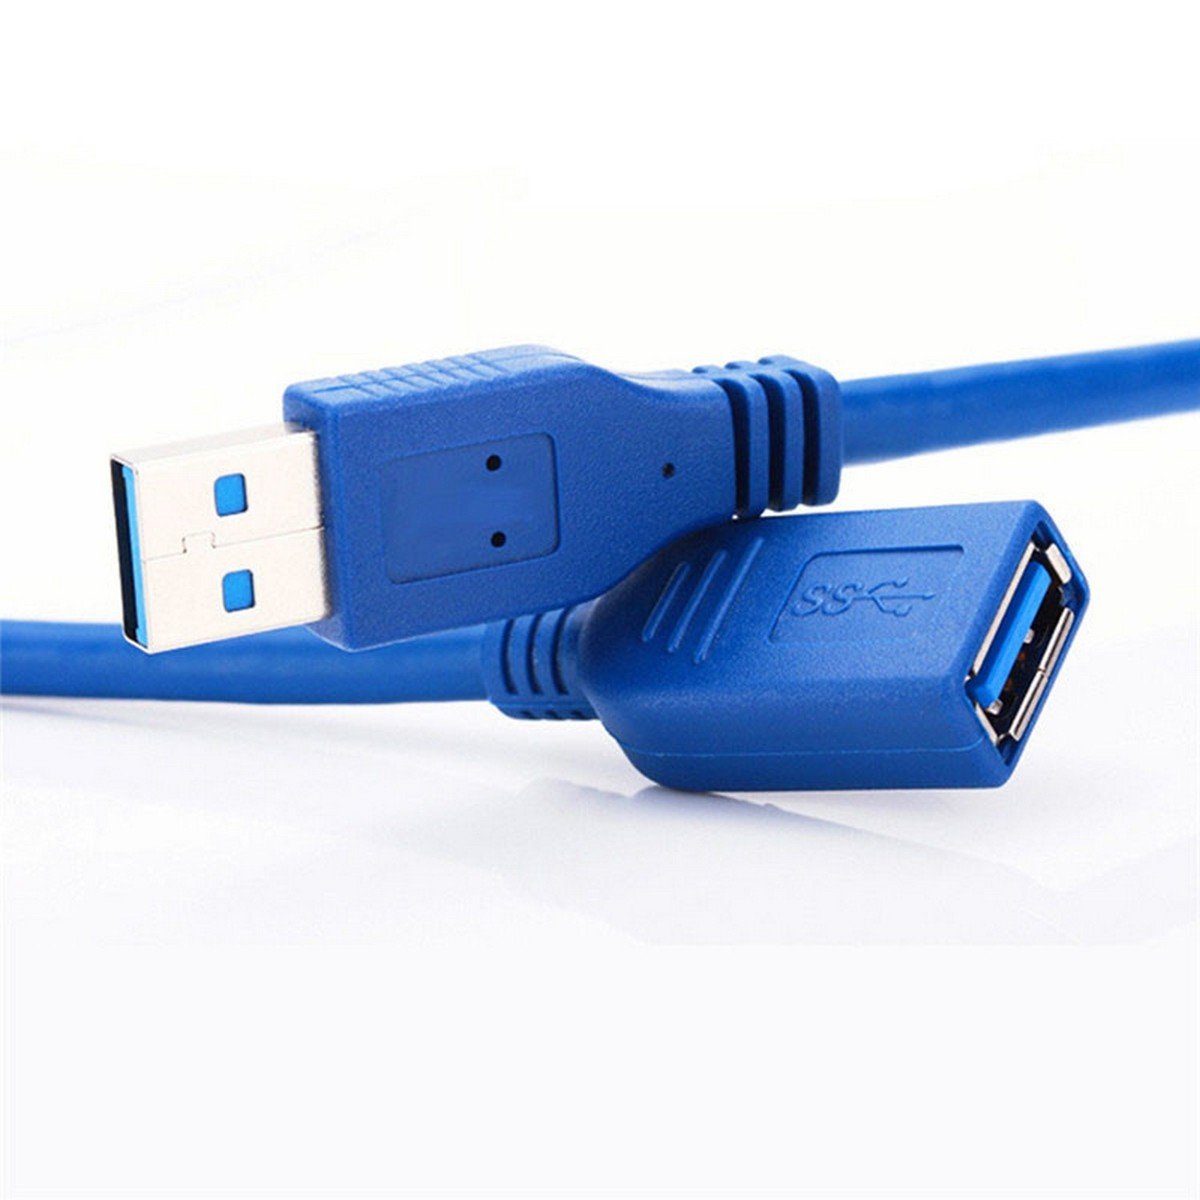 Trands USB3USB 3.0 Extension Cable TRCA101 3Meter